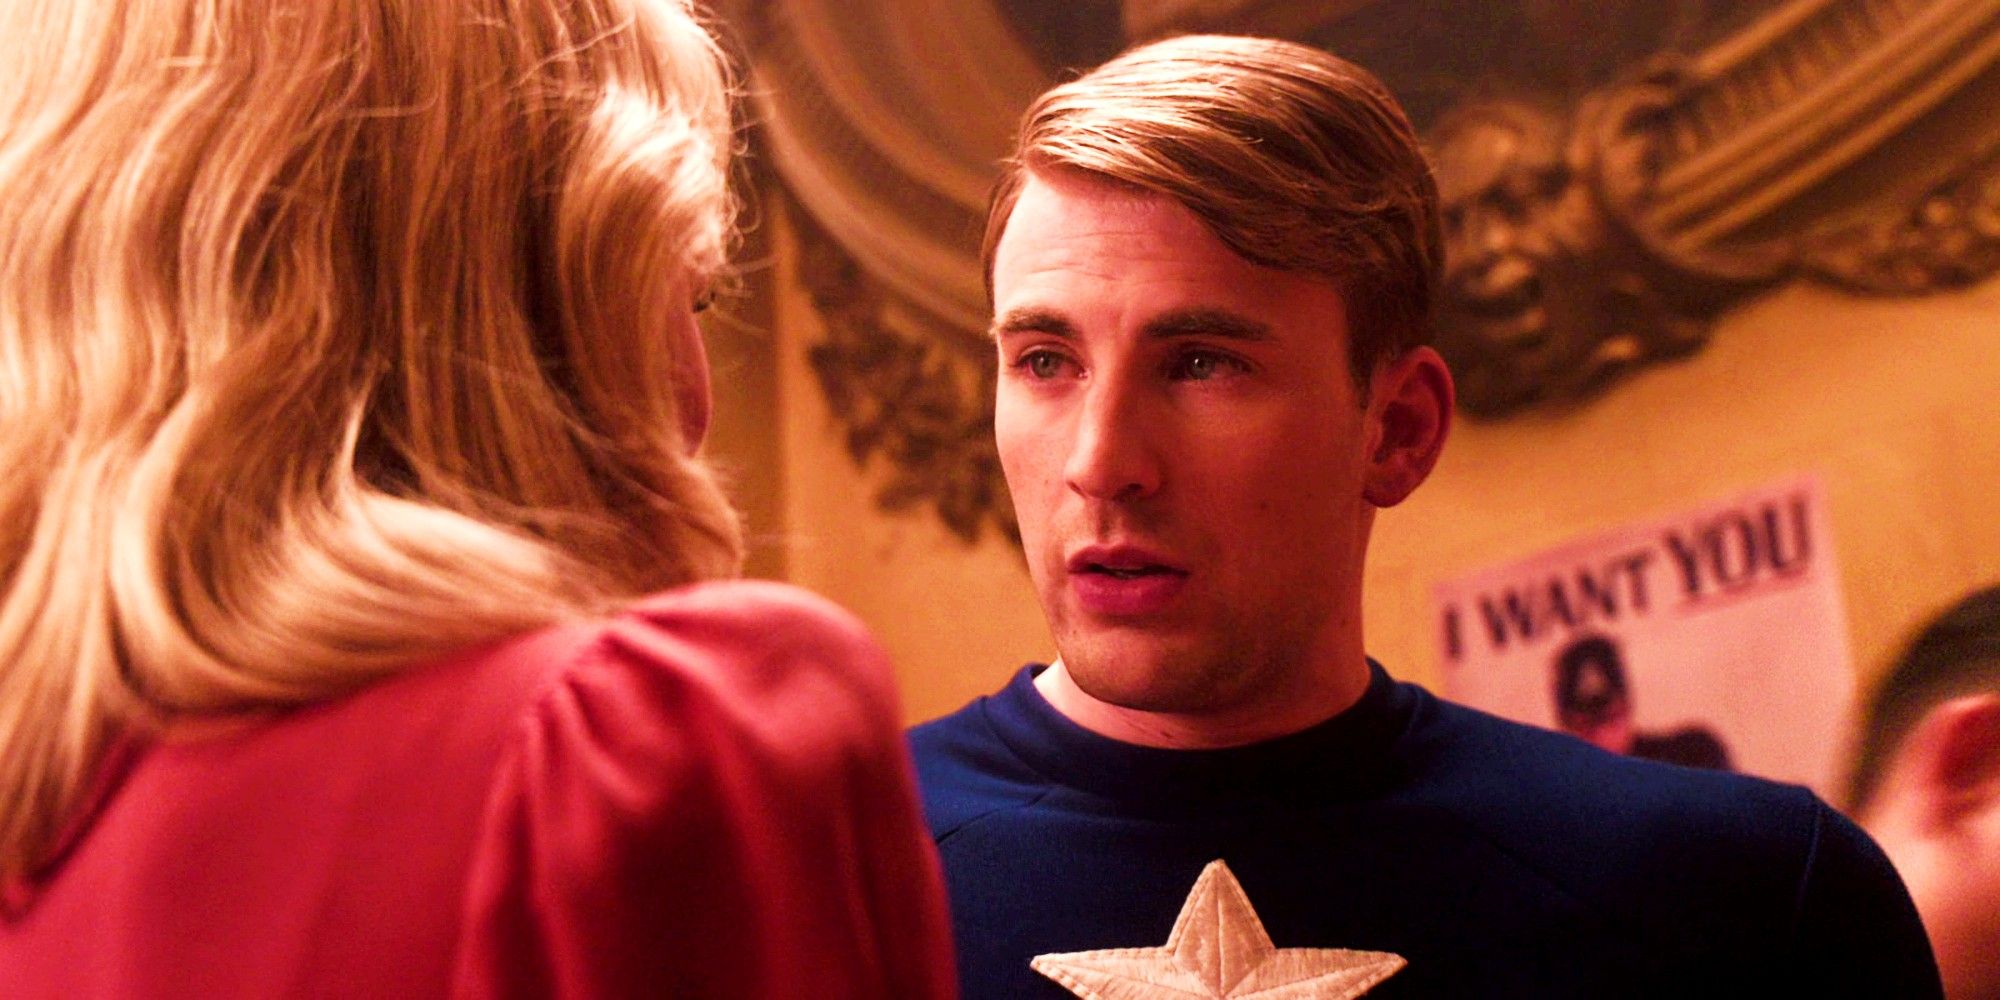 Chris Evans looks at a pretty woman in Captain America The First Avenger